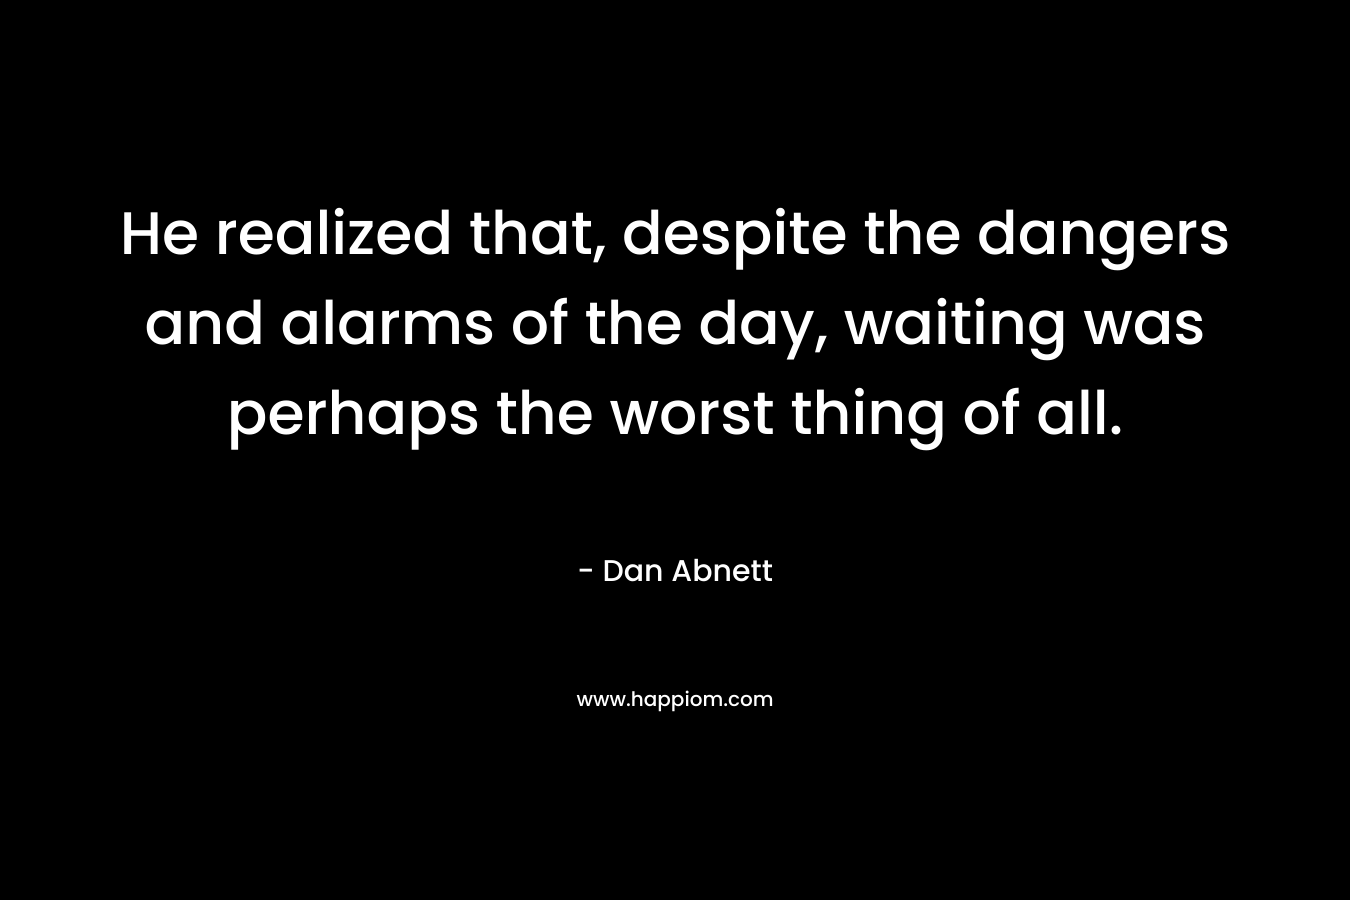 He realized that, despite the dangers and alarms of the day, waiting was perhaps the worst thing of all. – Dan Abnett